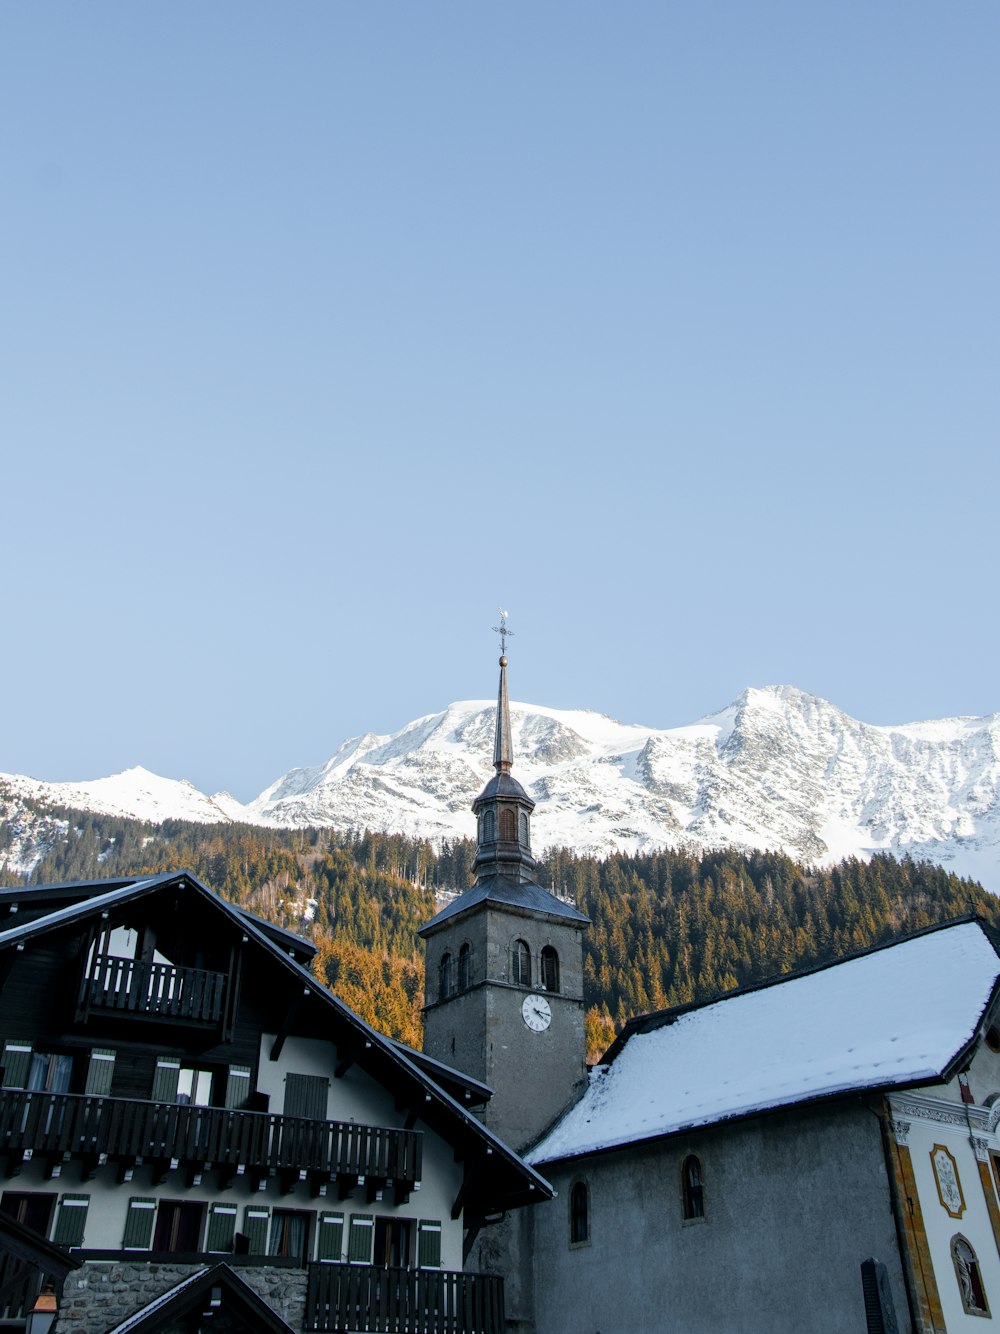 a building with a steeple in front of a snowy mountain